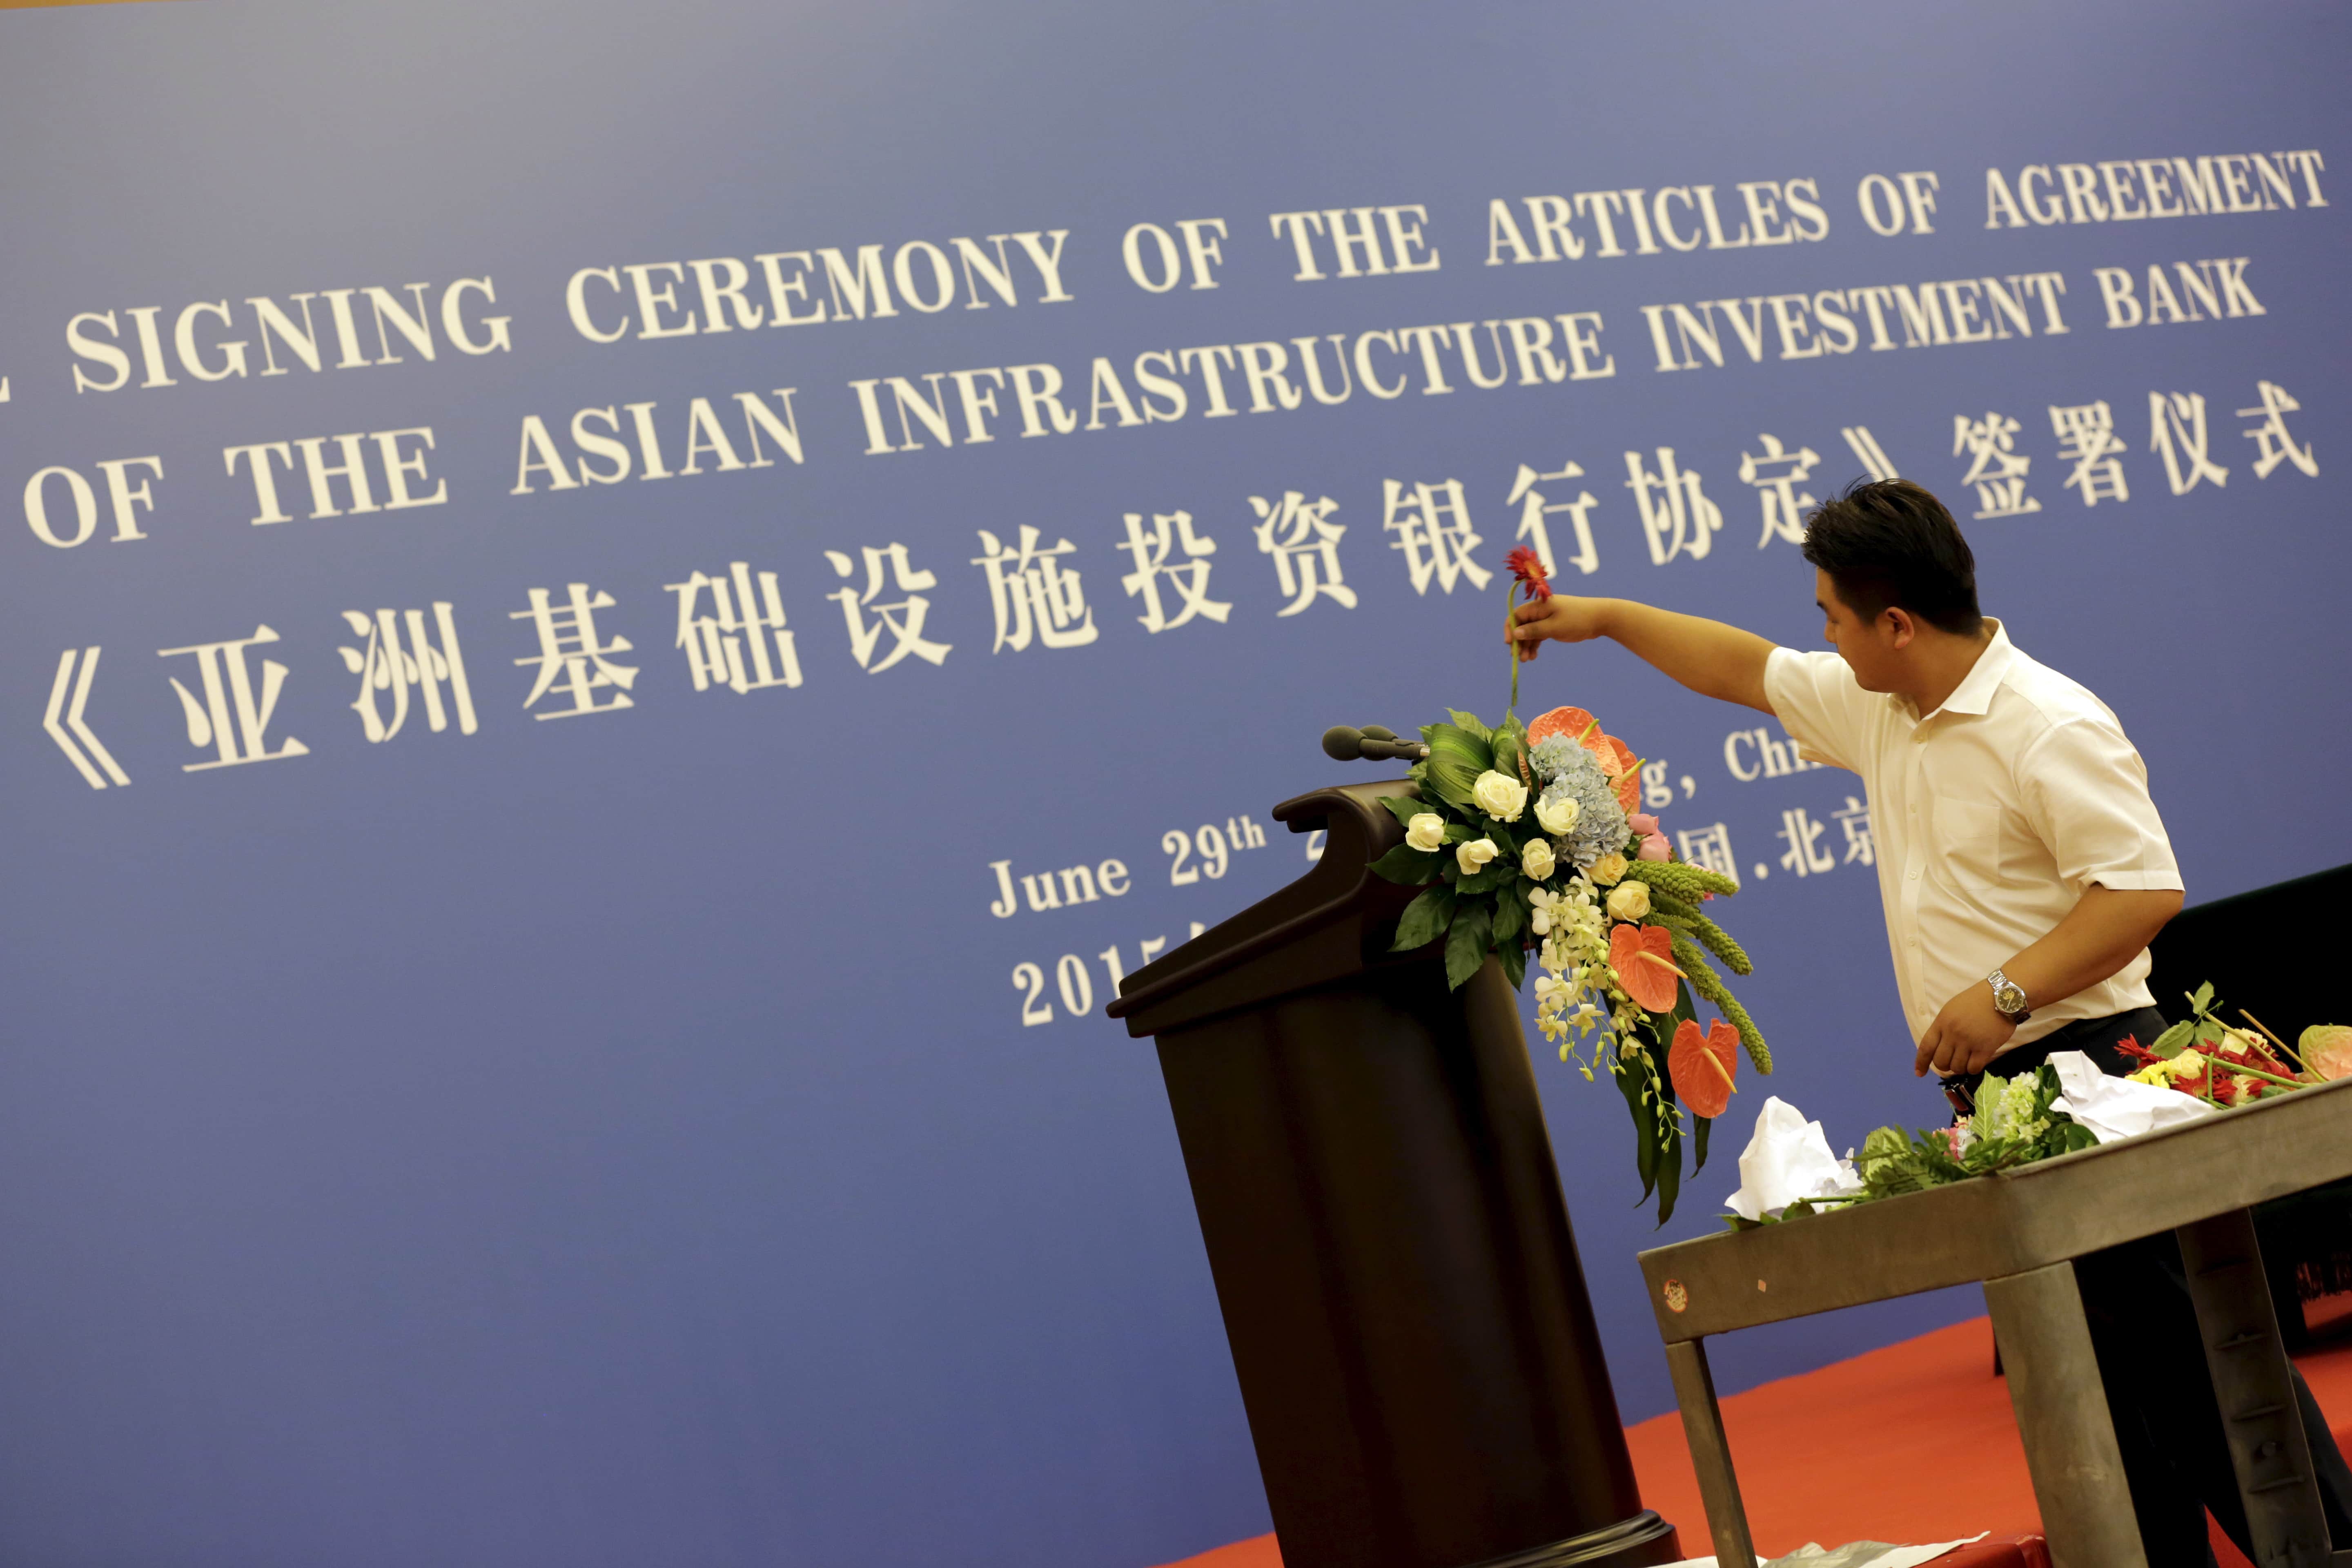 A worker decorates a lectern for a signing ceremony of articles of agreement of the Asian Infrastructure Investment Bank (AIIB), at the Great Hall of the People in Beijing, 29 June 2015, REUTERS/Jason Lee